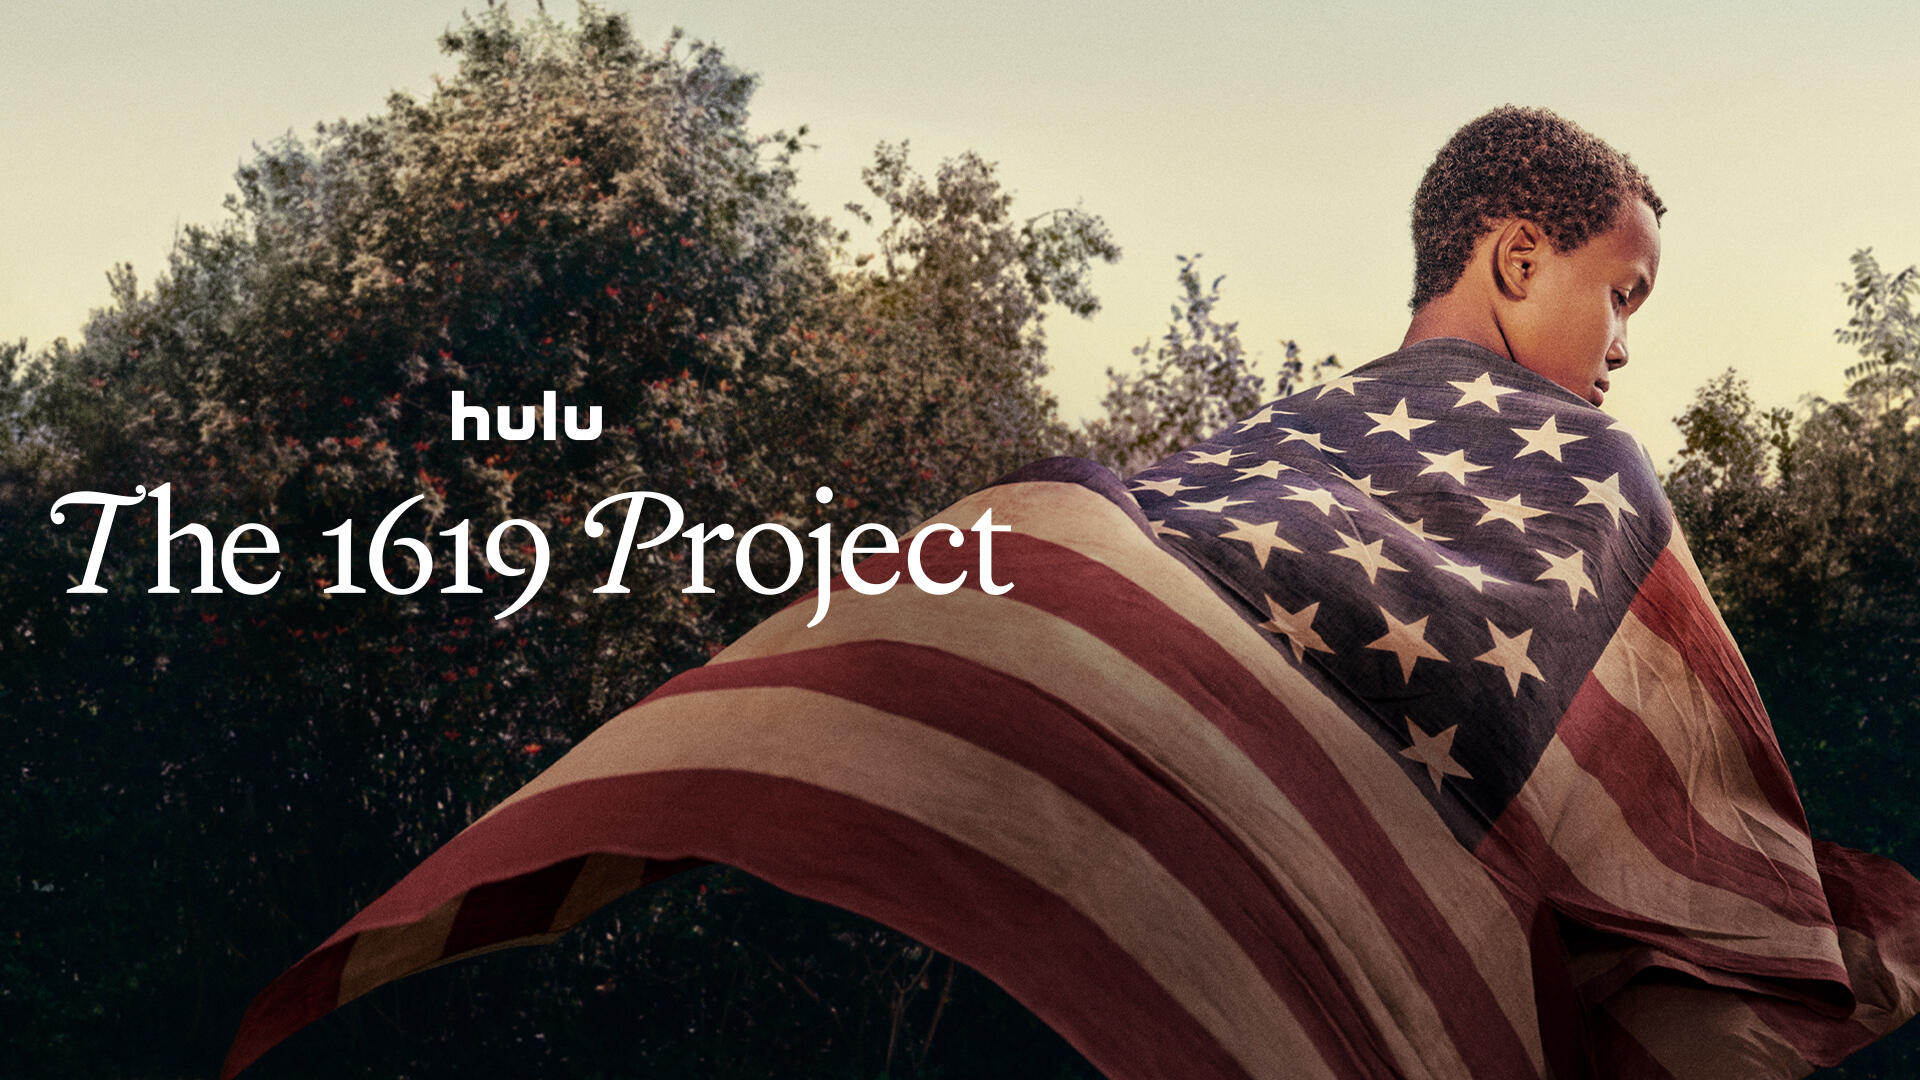 The 1619 Project -- Hulu’s upcoming six-part limited docu-series “The 1619 Project,” is an expansion of “The 1619 Project” created by Pulitzer Prize-winning journalist Nikole Hannah-Jones and The New York Times Magazine. (Courtesy of Hulu)